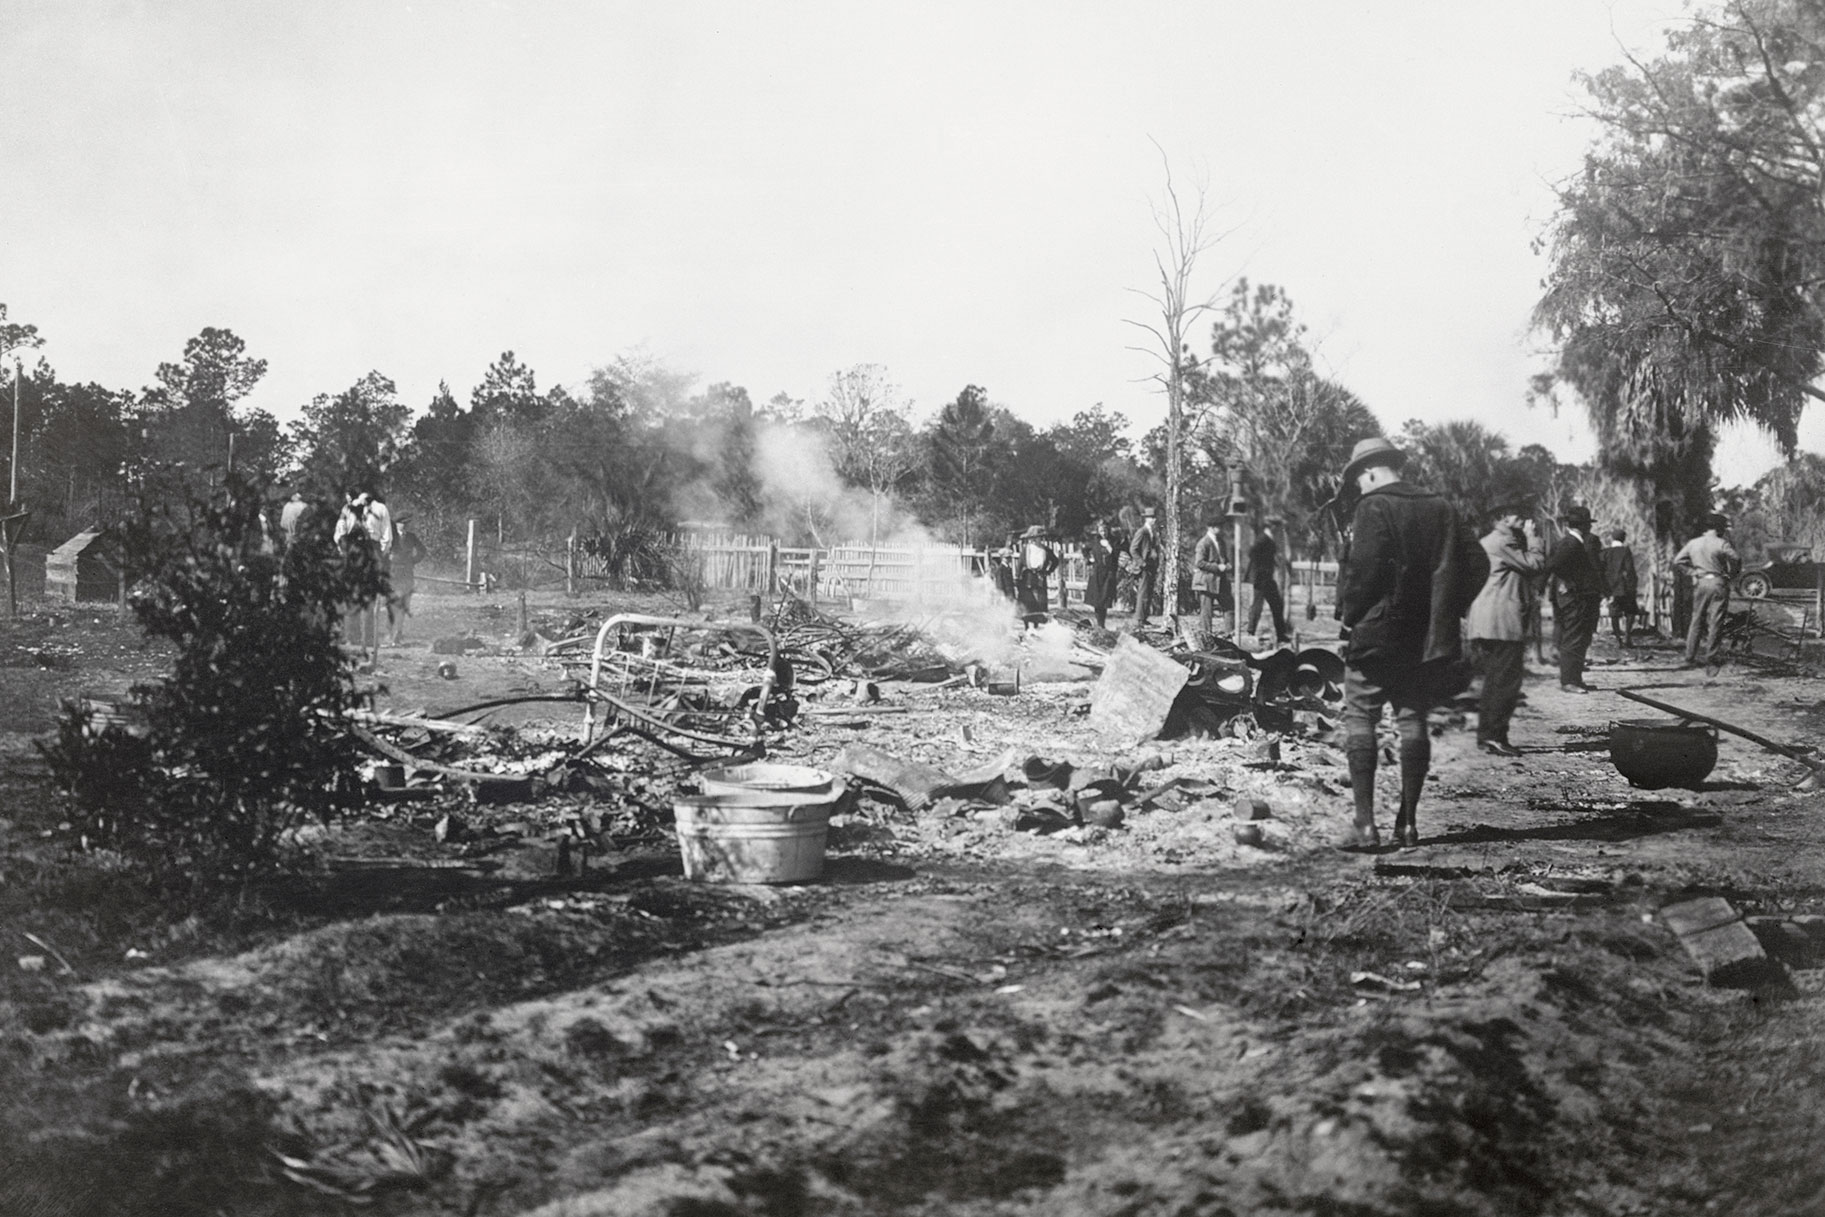 The aftermath of the 1923 Rosewood massacre